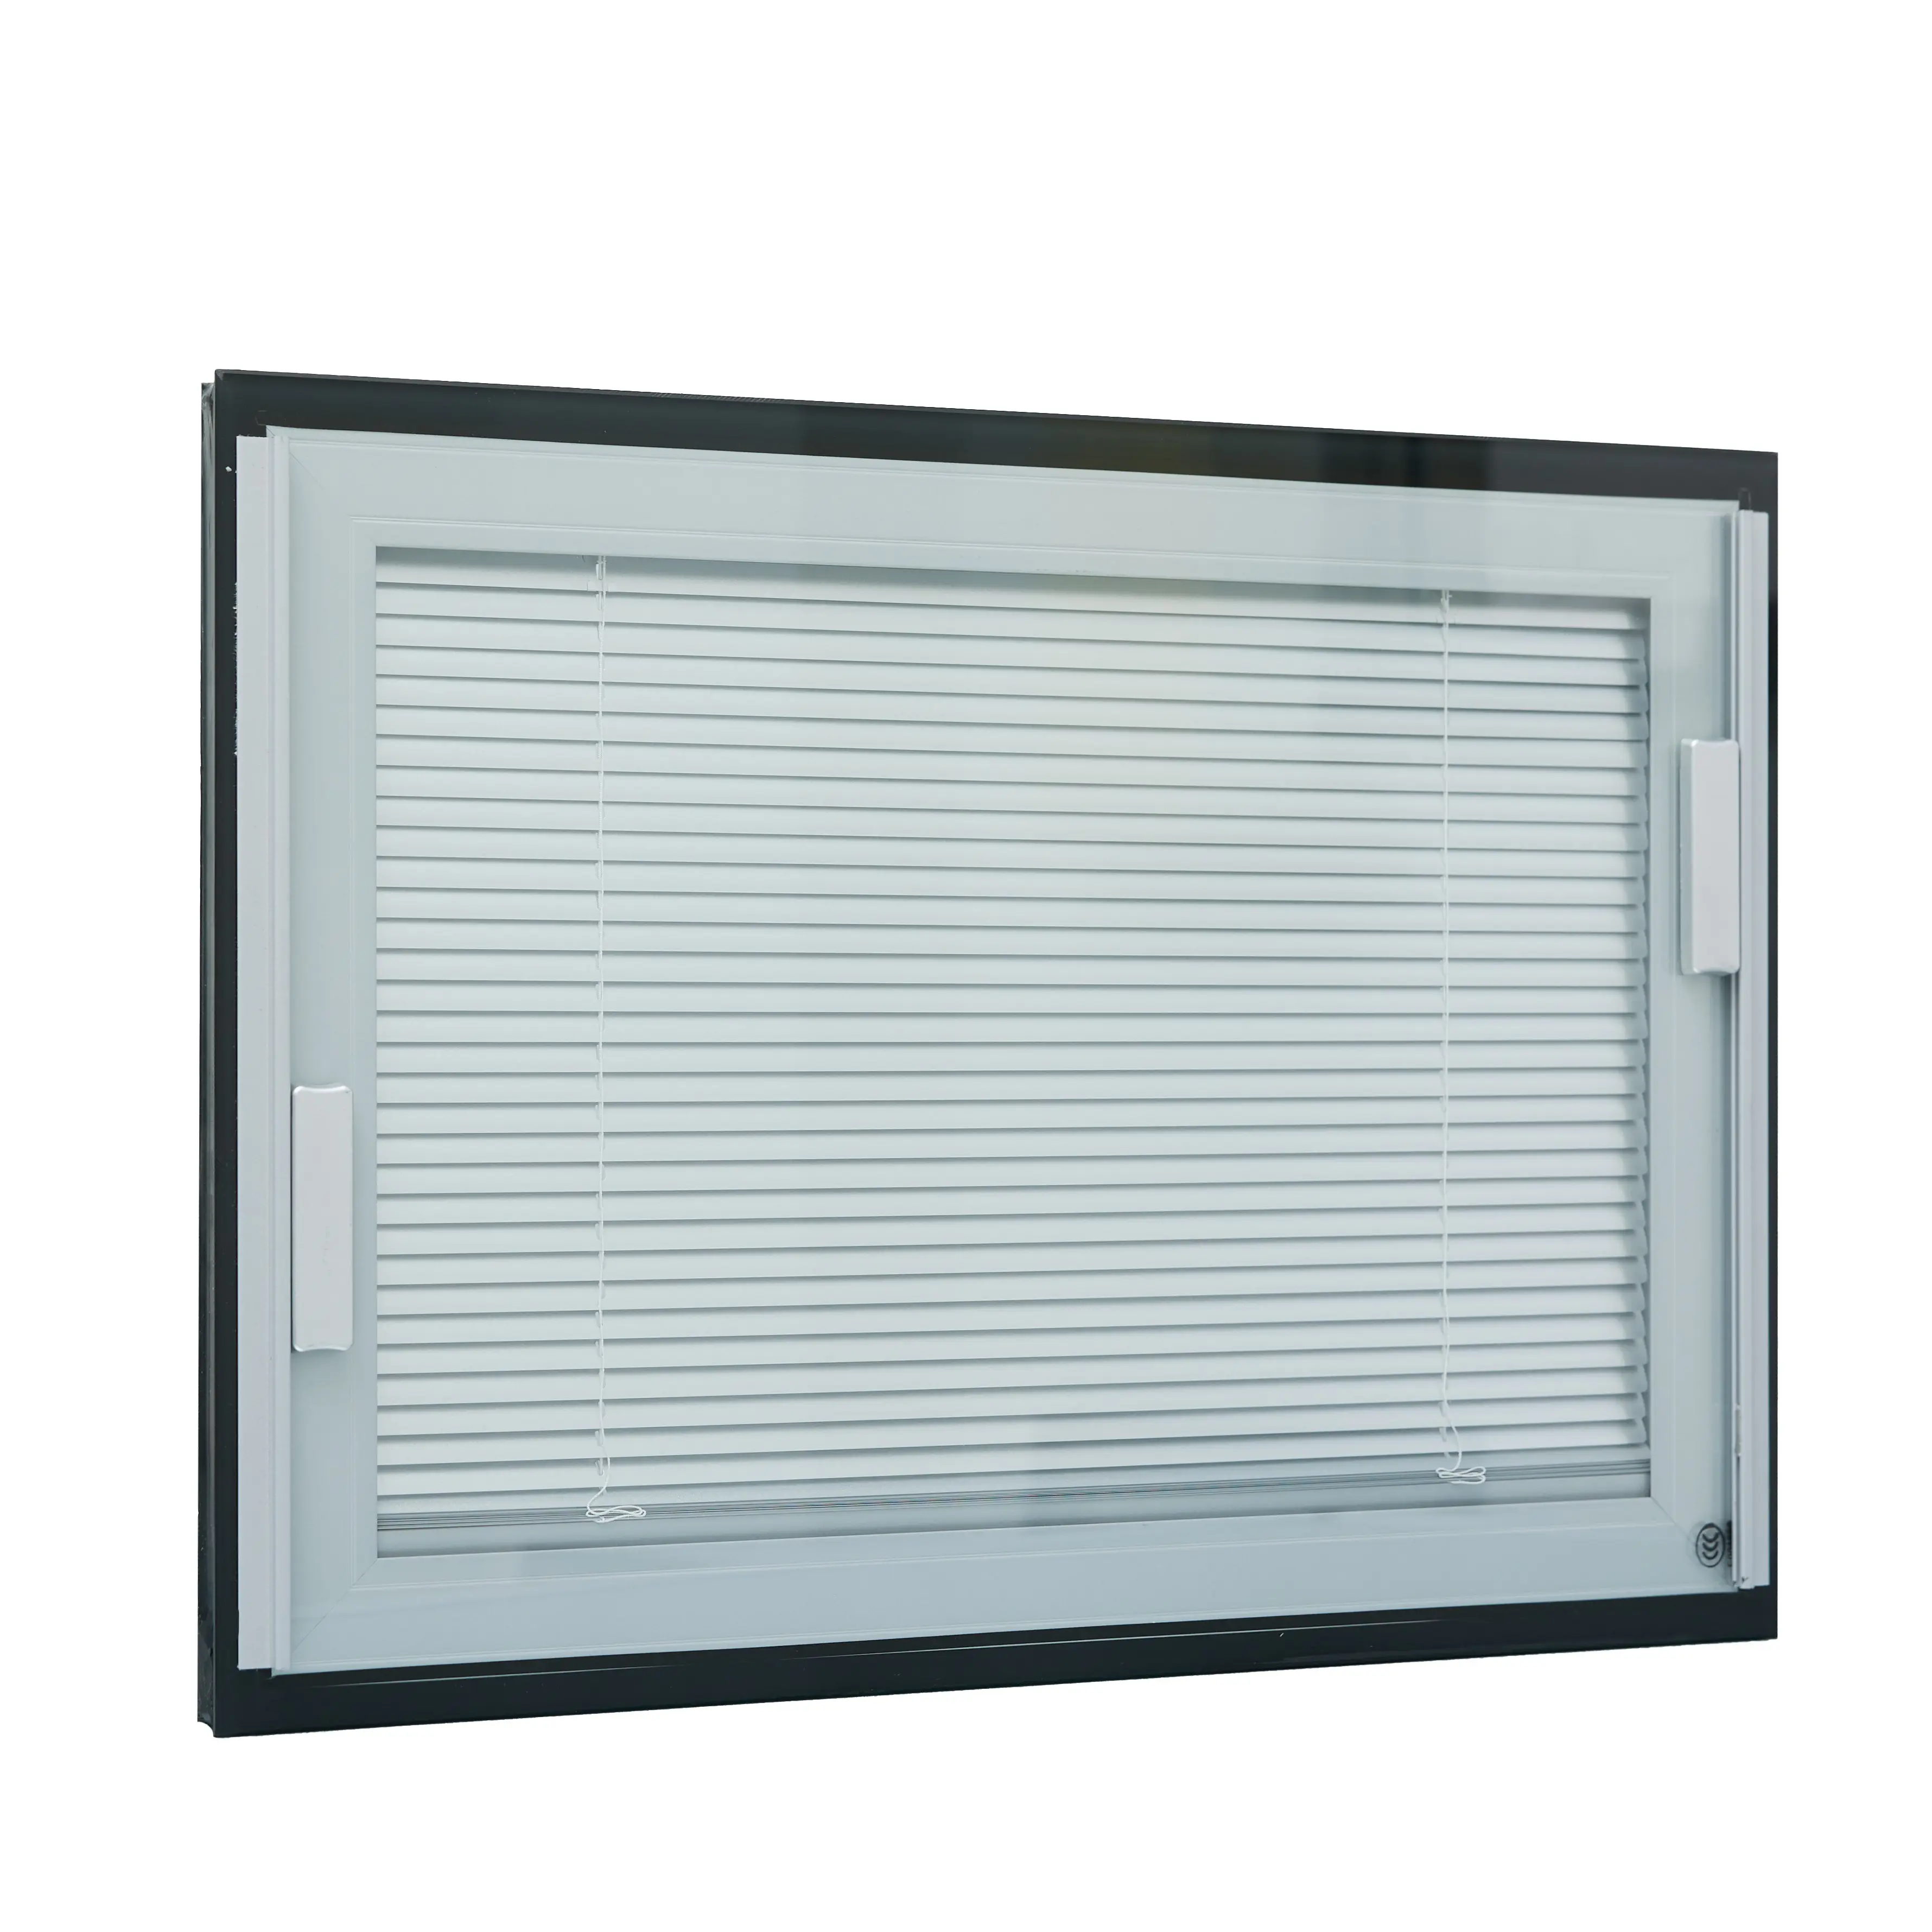 Customizable Minimalist style blinds windows with aluminum alloy frame for windows and doors